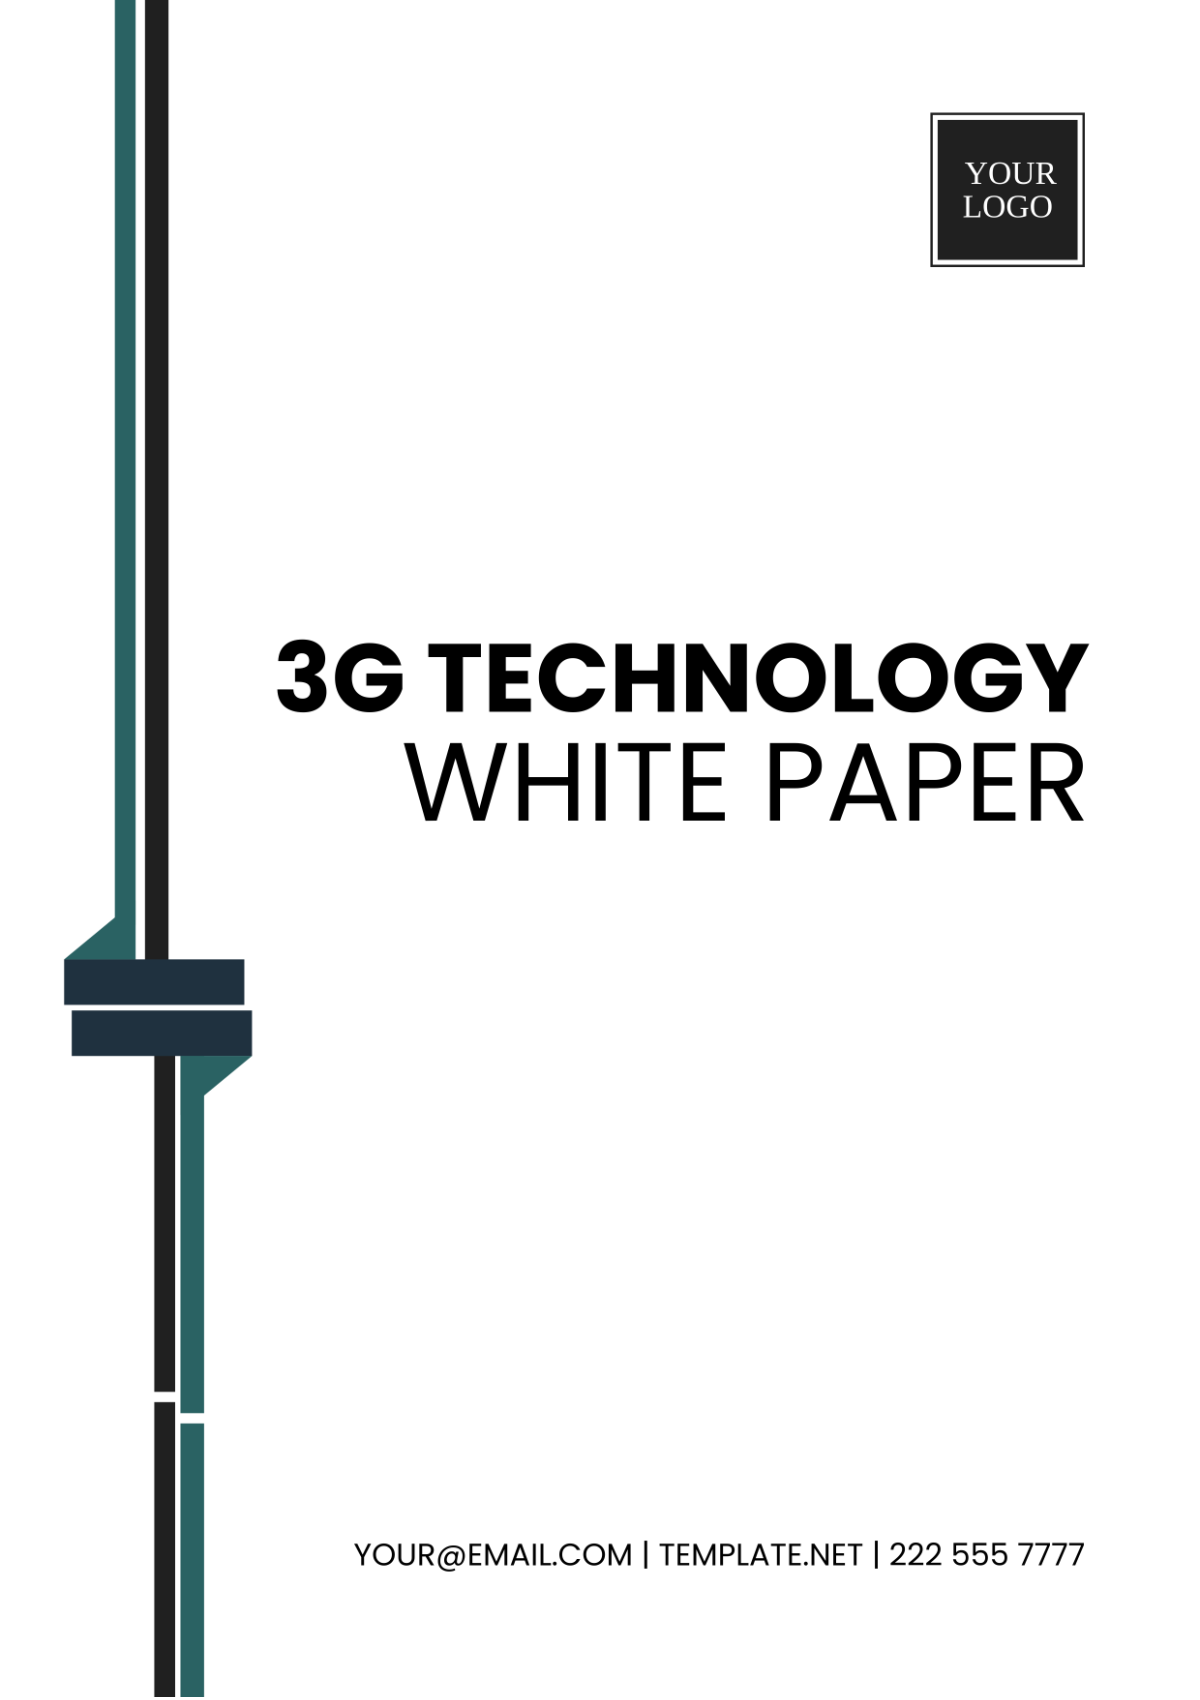 3G Technology White Paper Template